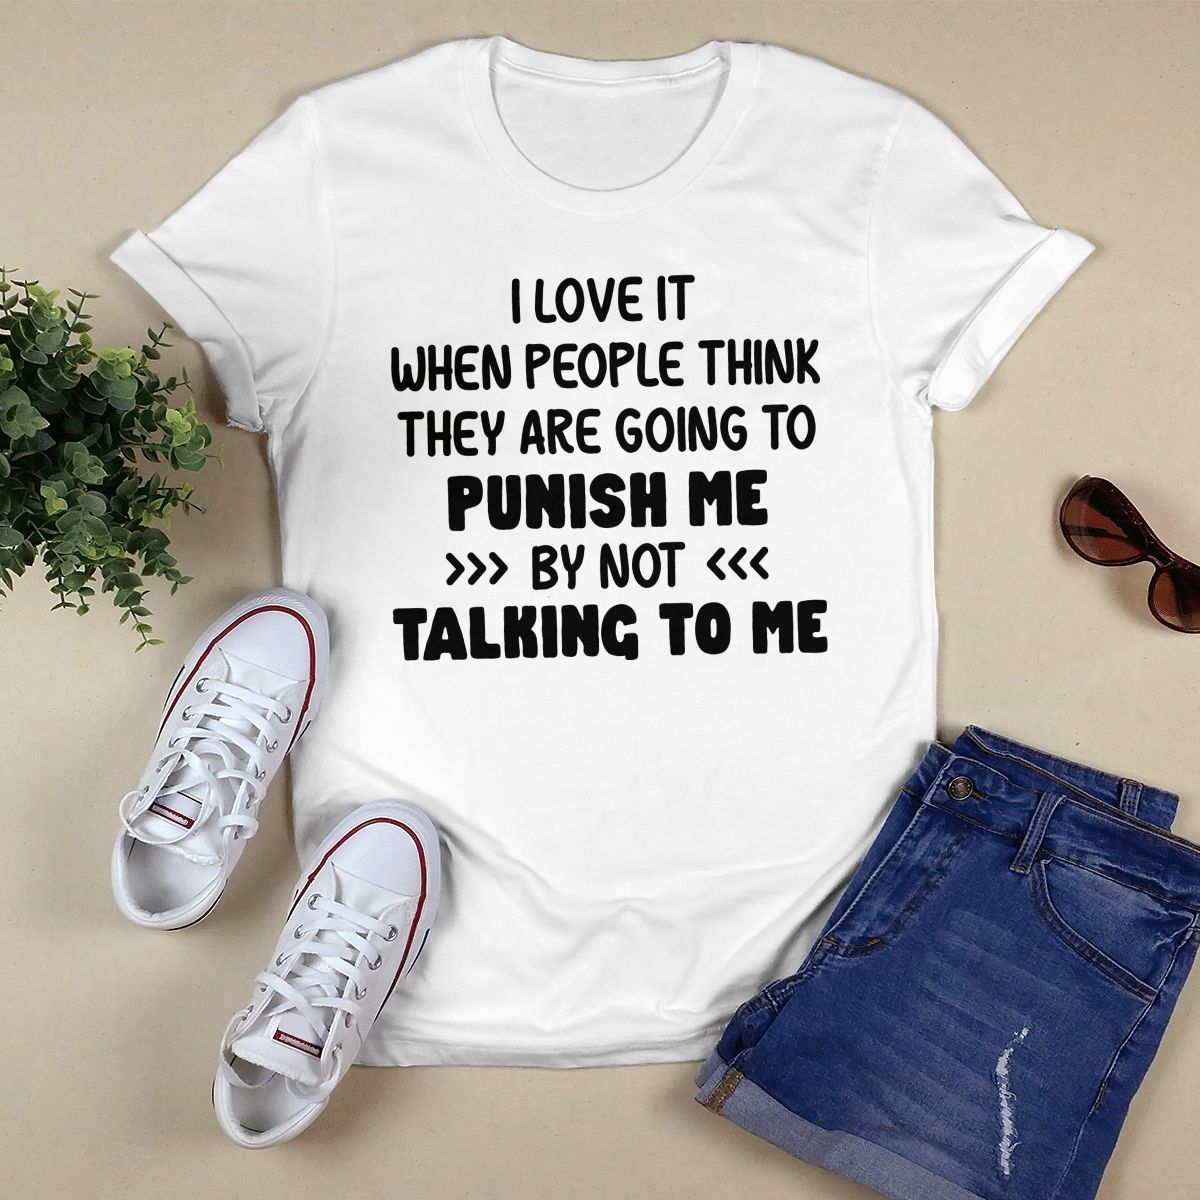 I Love It When People Think shirt